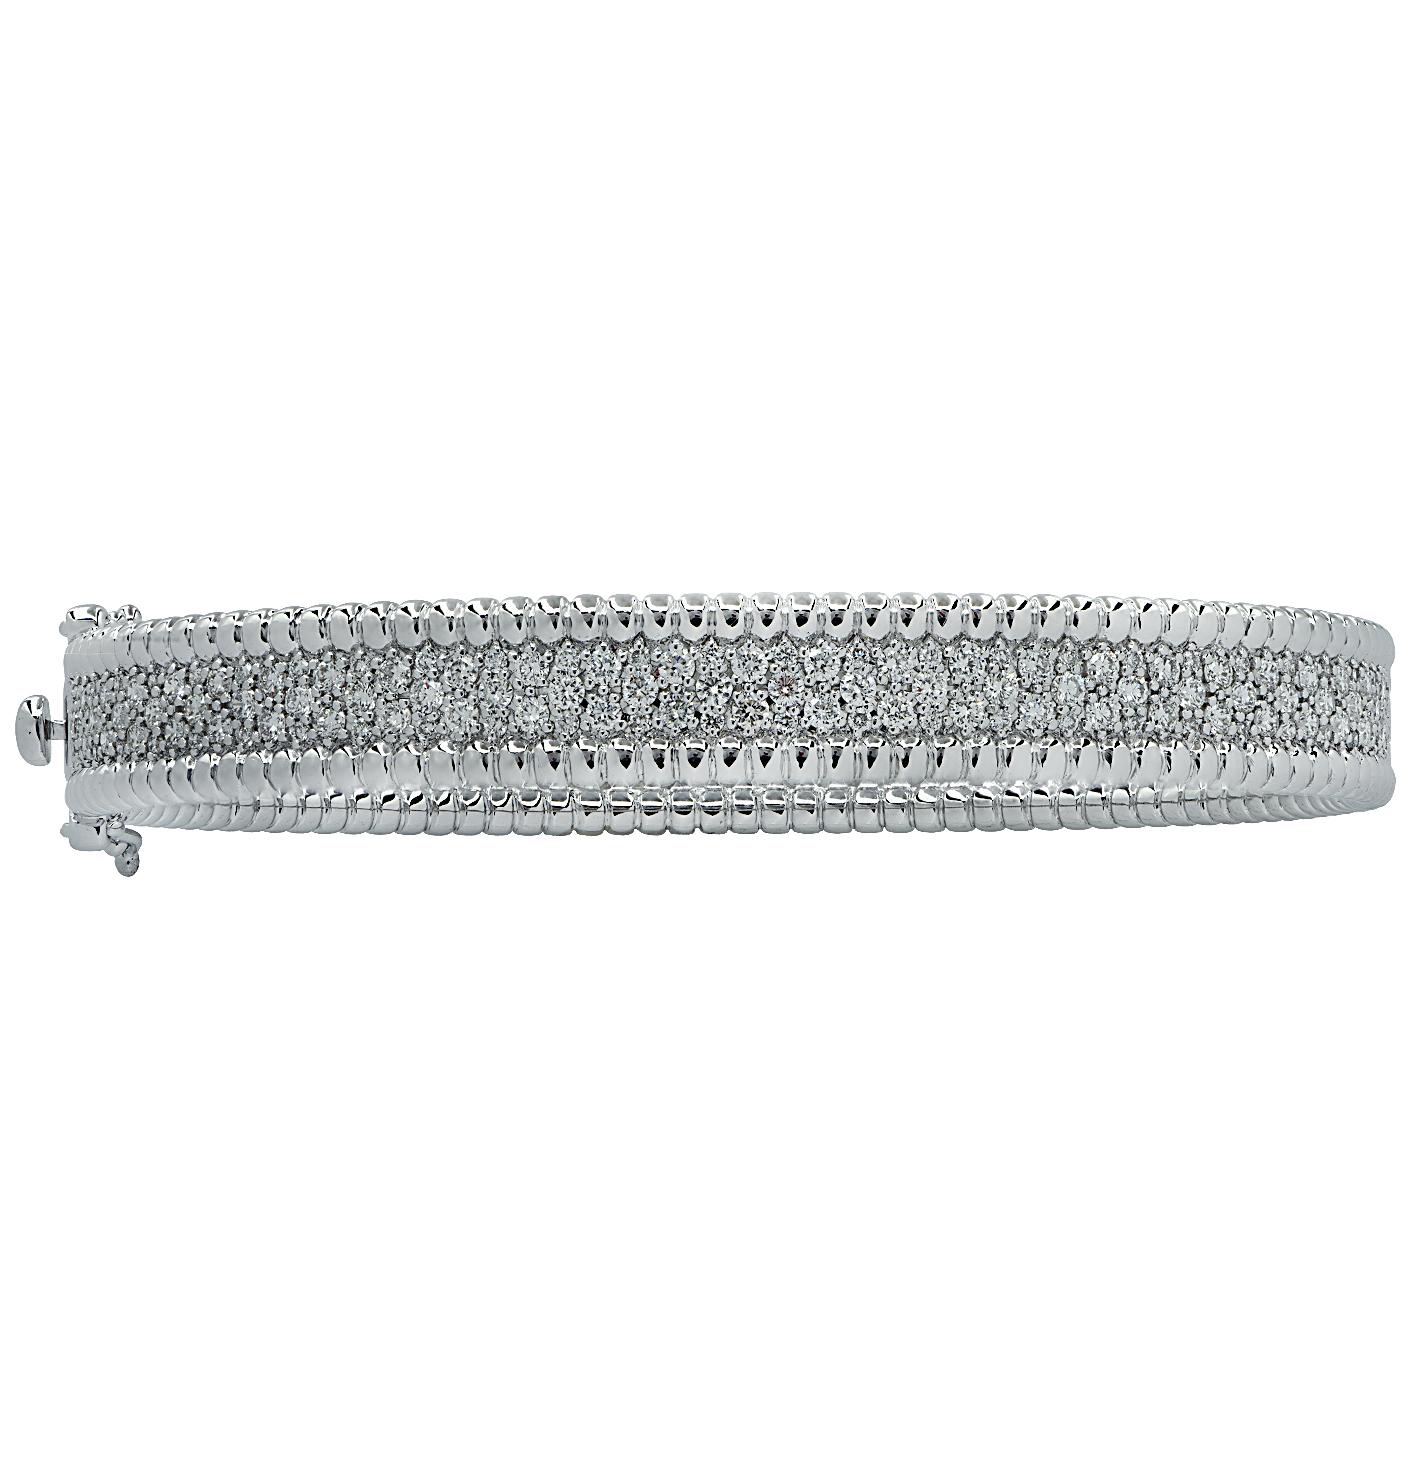 Stunning Vivid Diamonds Bangle Bracelet crafted in white gold, featuring 262 round brilliant cut diamonds weighing 2.88 carats total, F-G color, VS-SI clarity. This elegant bangle is set with three rows of diamonds, laced with white gold beads